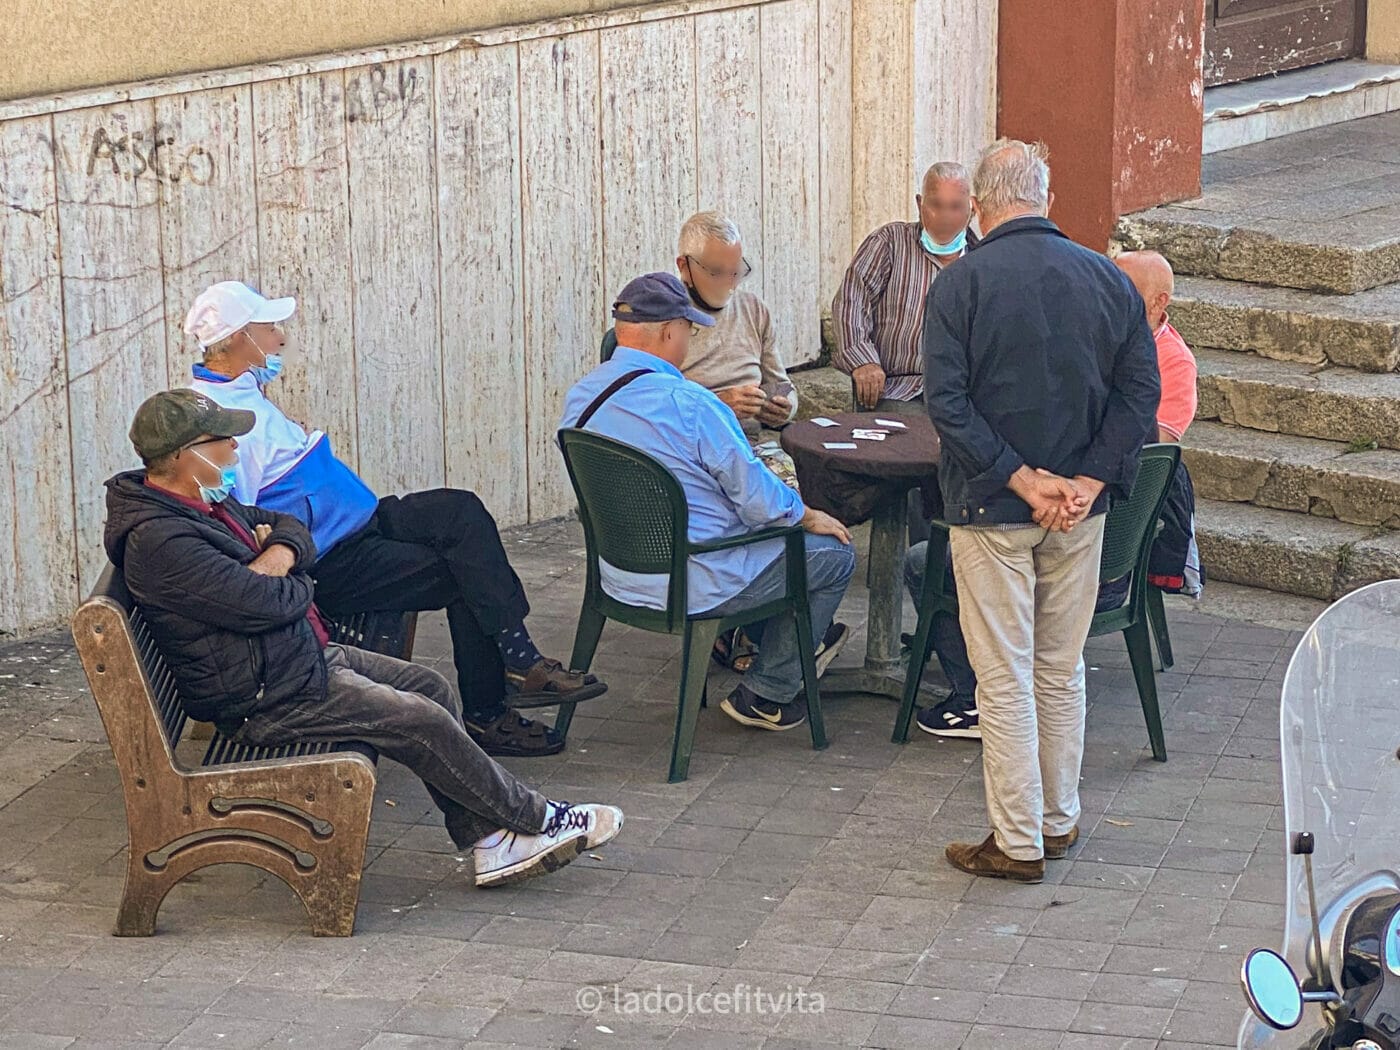 Italian men gathered in the town square to play cards - Pizzo Calabro